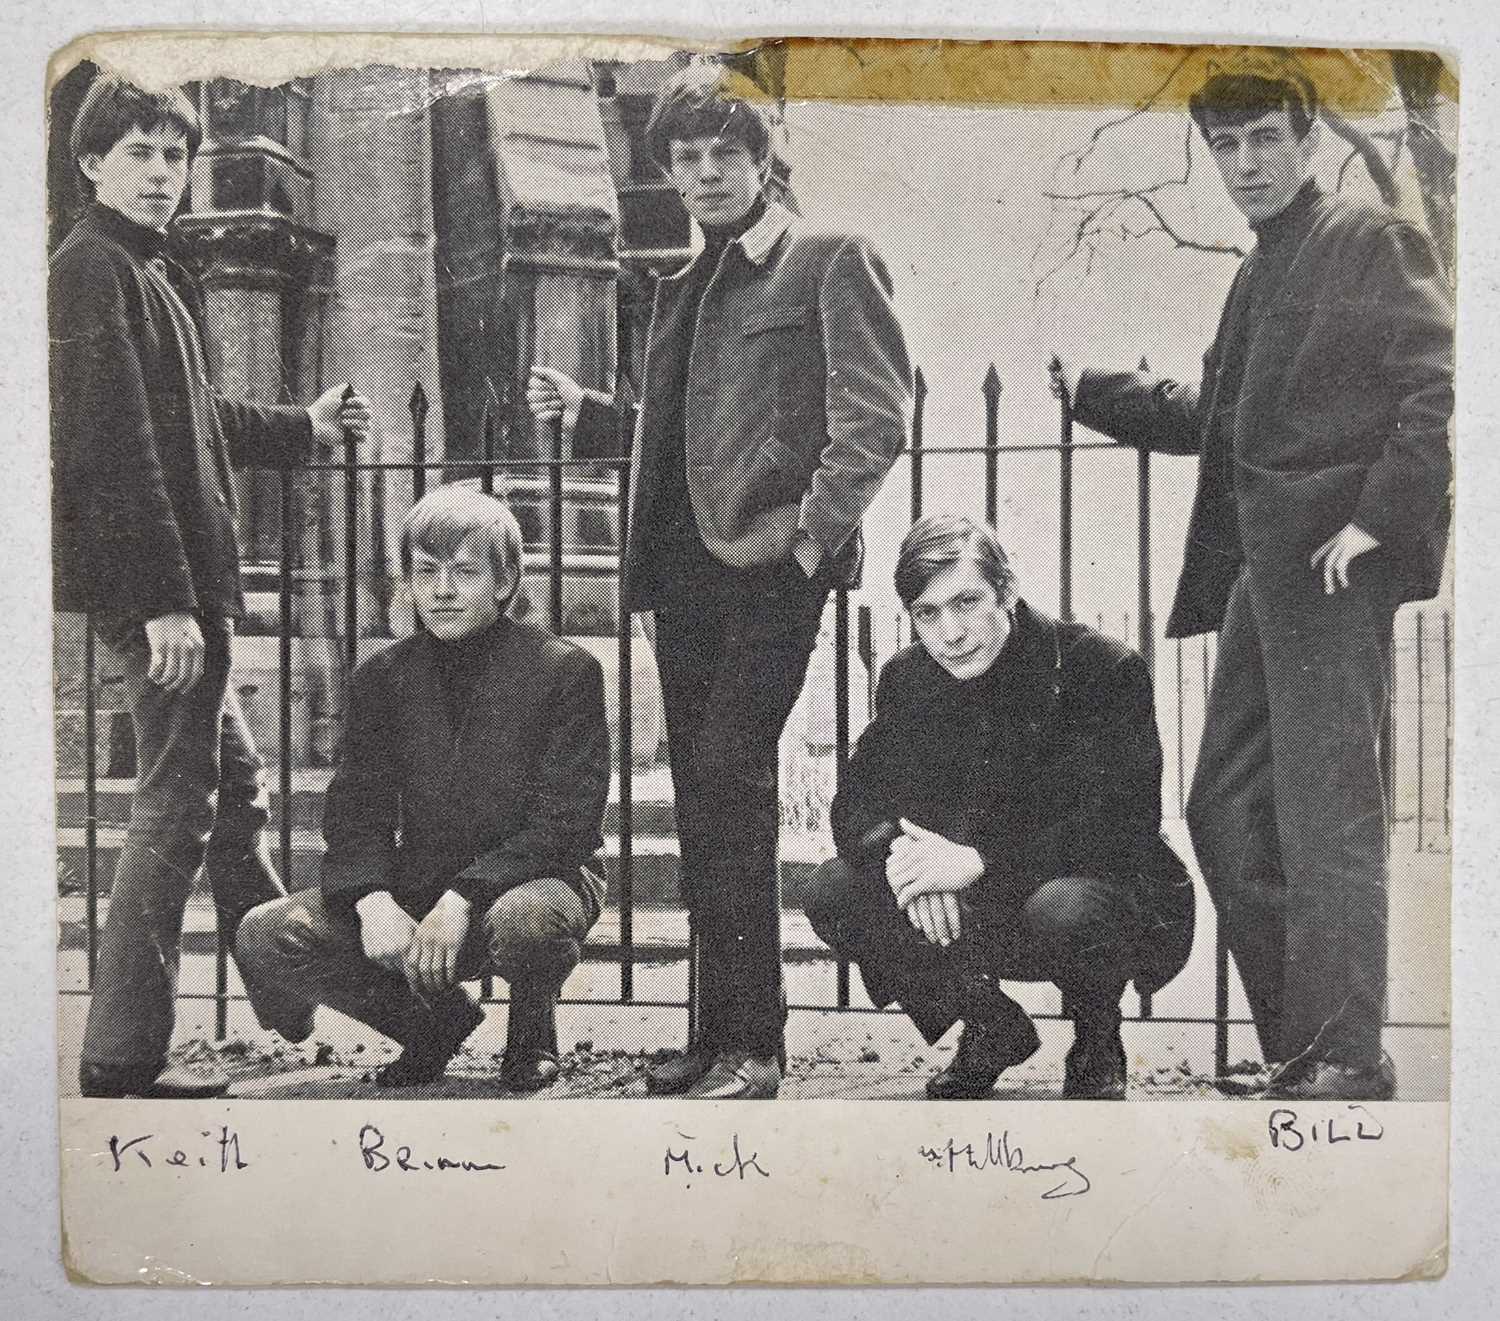 THE ROLLING STONES - FULLY SIGNED EARLY FAN CLUB CARD. - Image 2 of 2